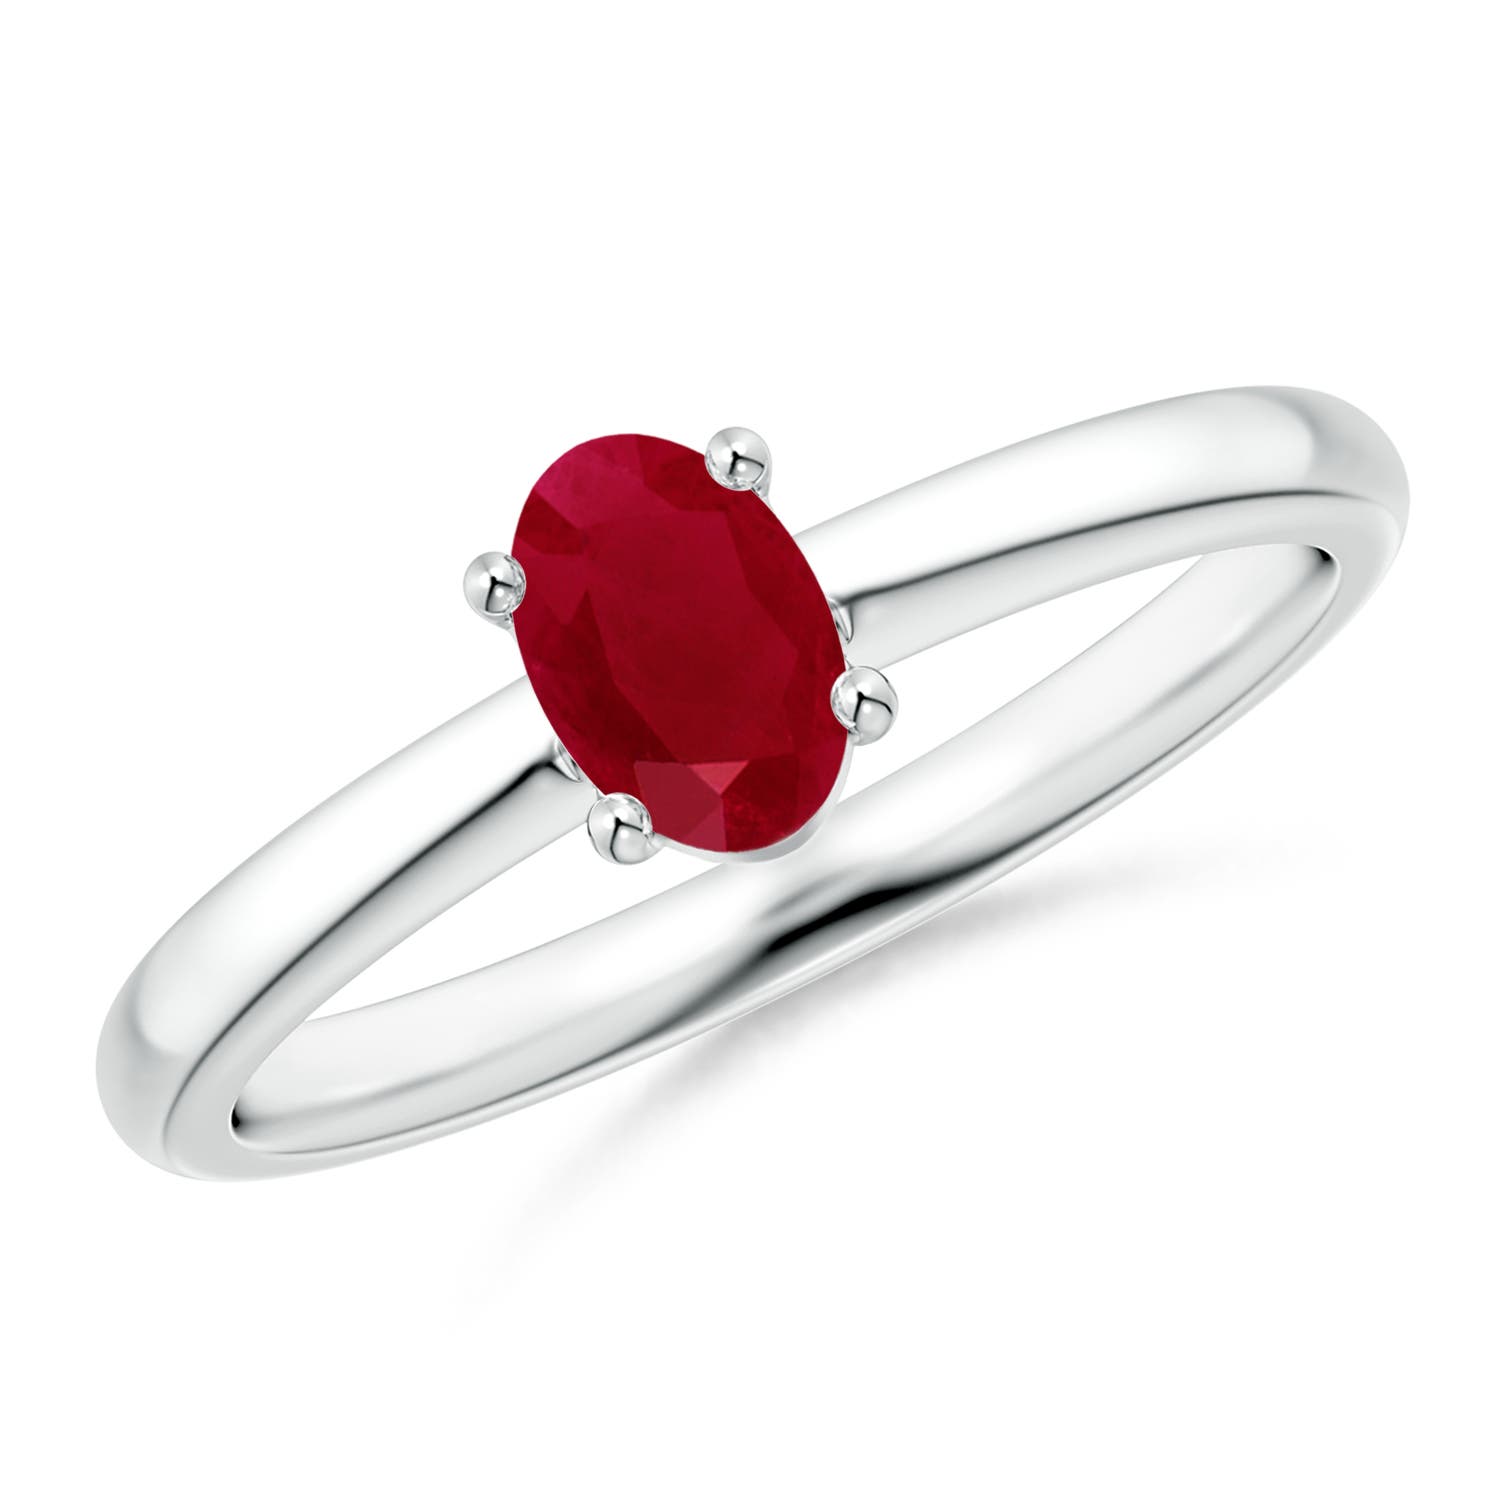 AA - Ruby / 0.6 CT / 14 KT White Gold